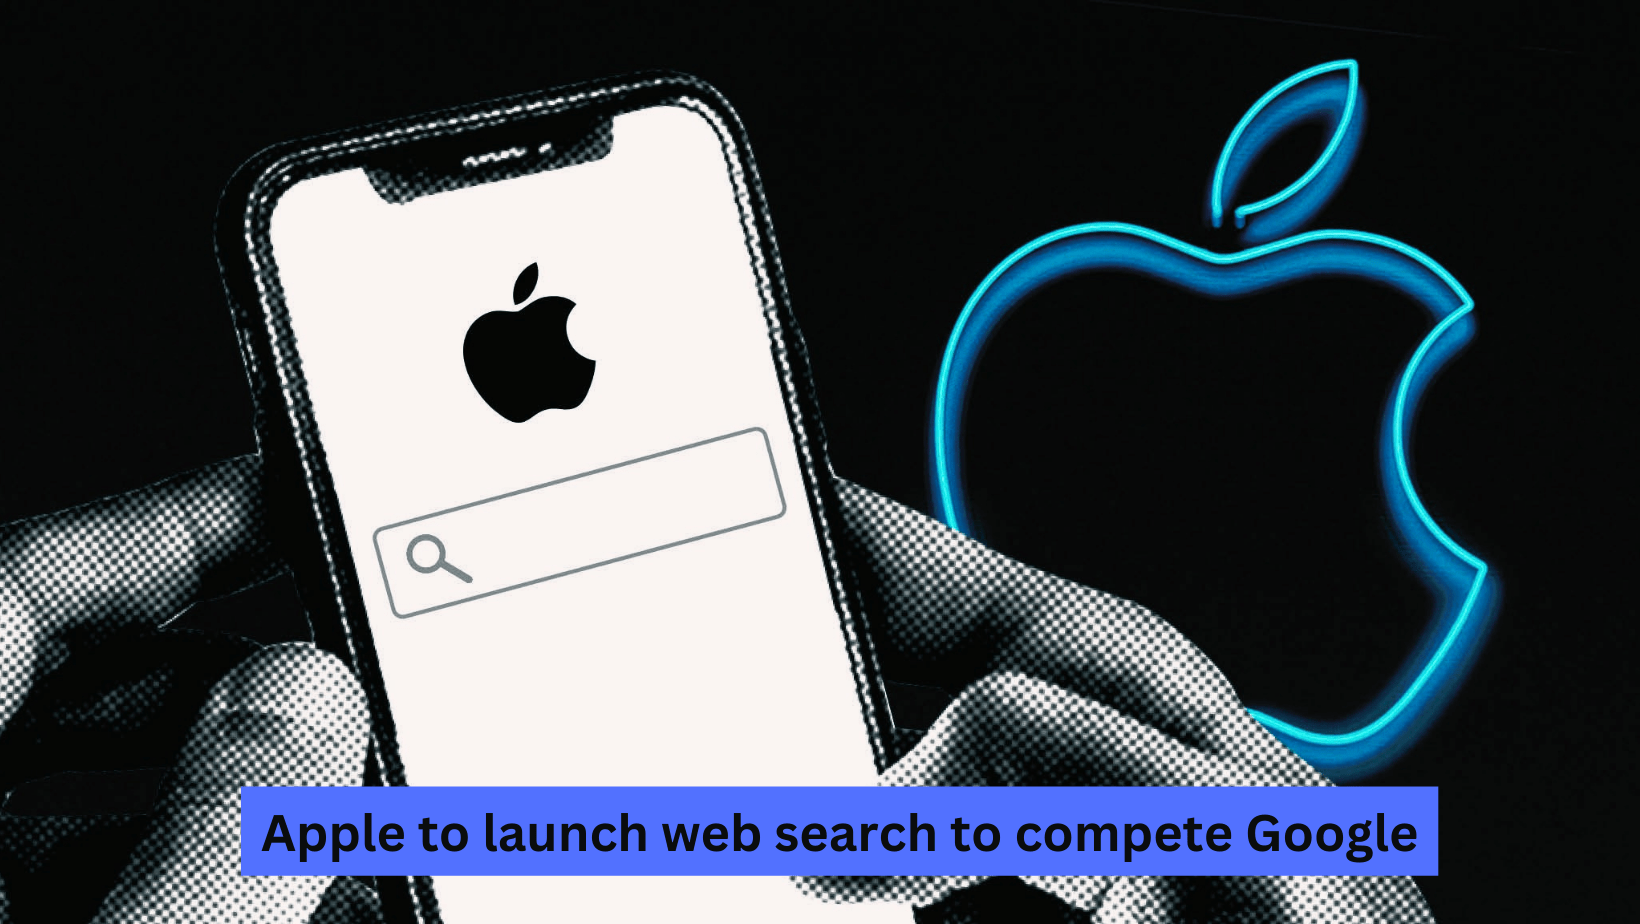 Apple to Launch Apple Web Search to compete google